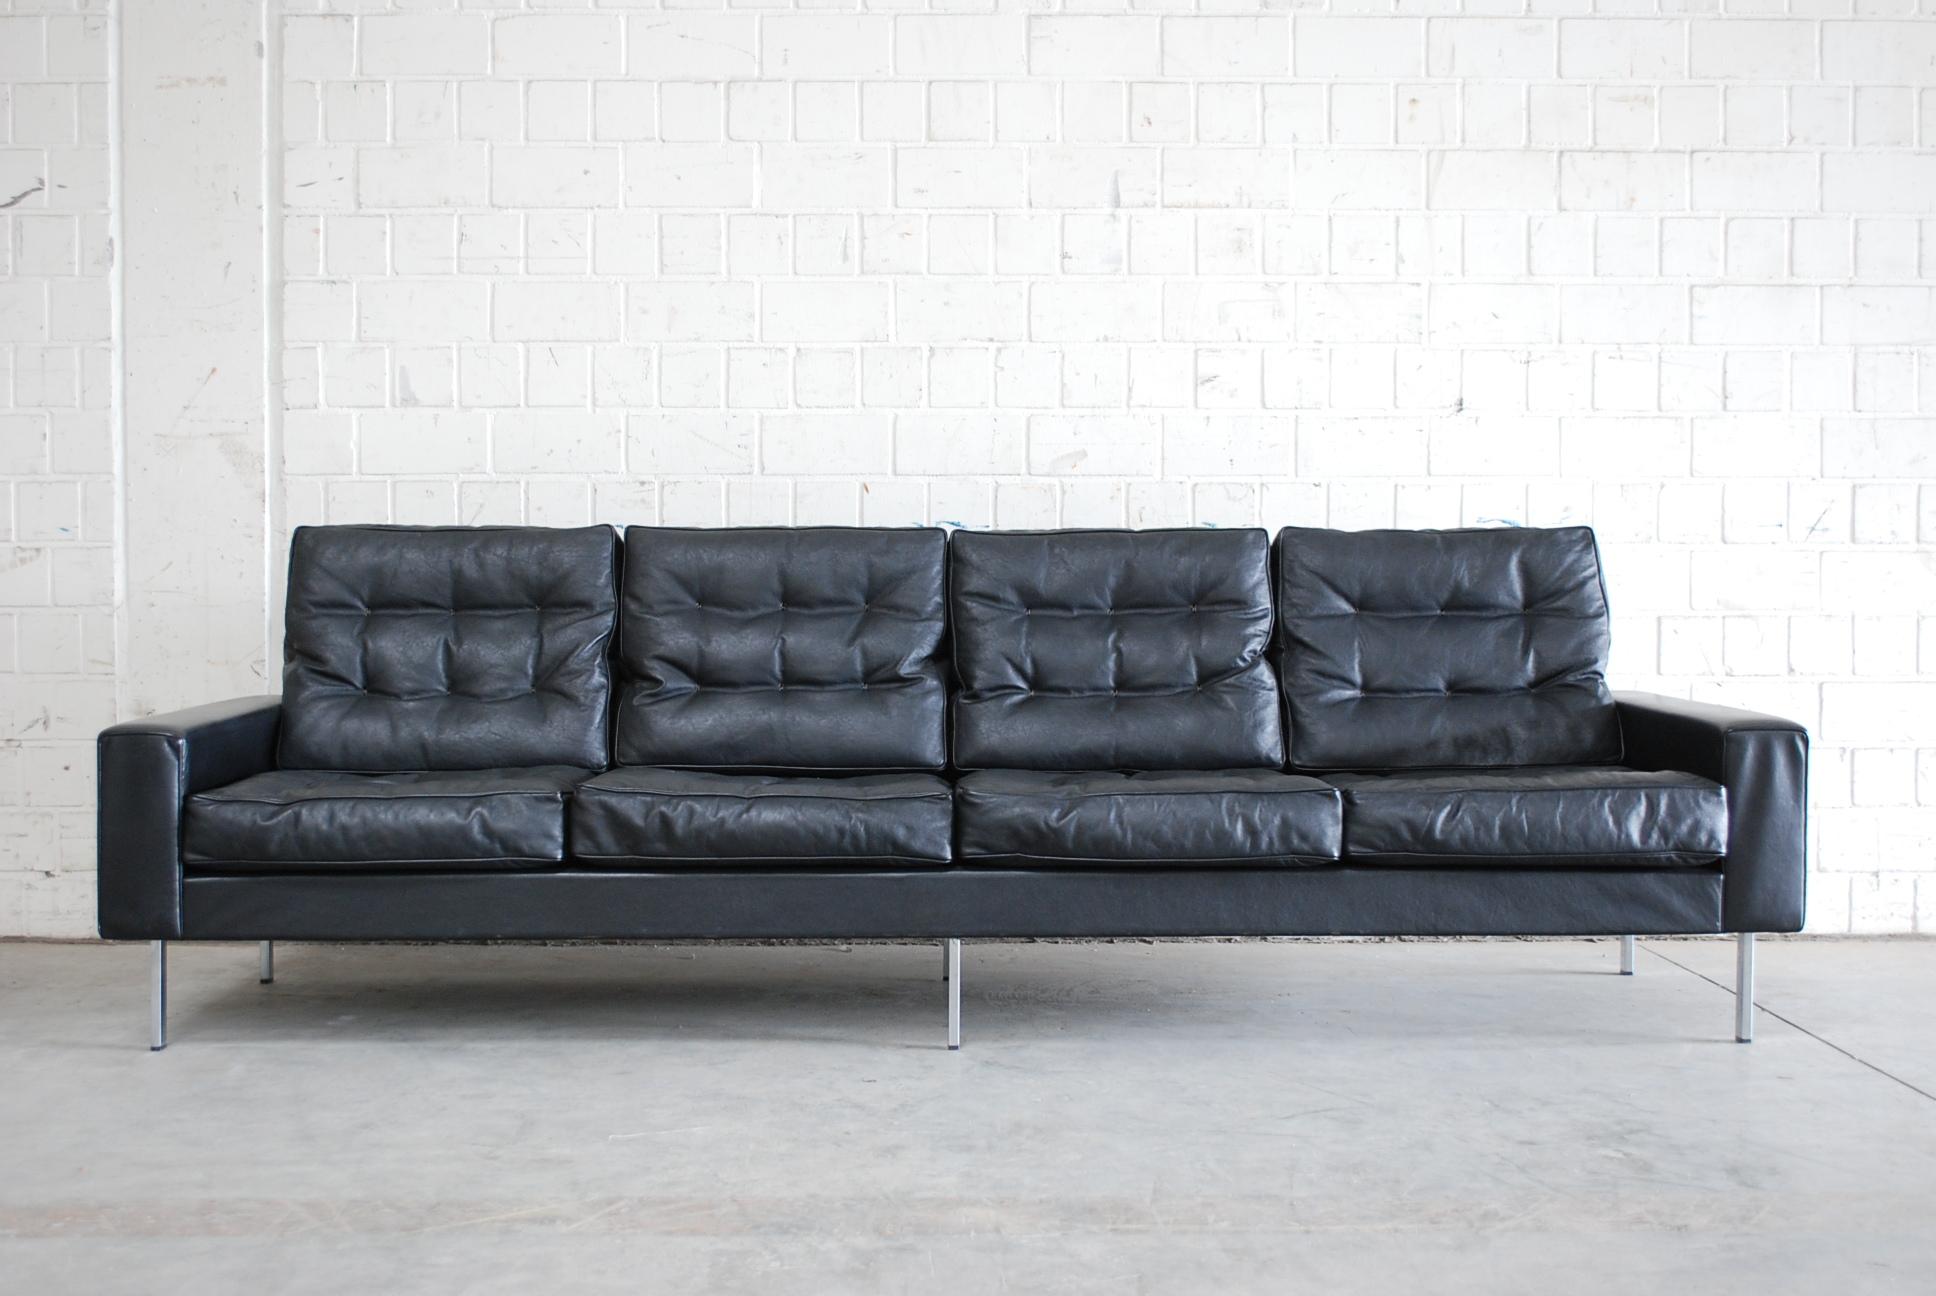 This 4-seat leather sofa is from 1967. In black leather and down filings.
One of the earlier designs of De Sede.
We also had 2 armchairs that would fit well to this sofa.